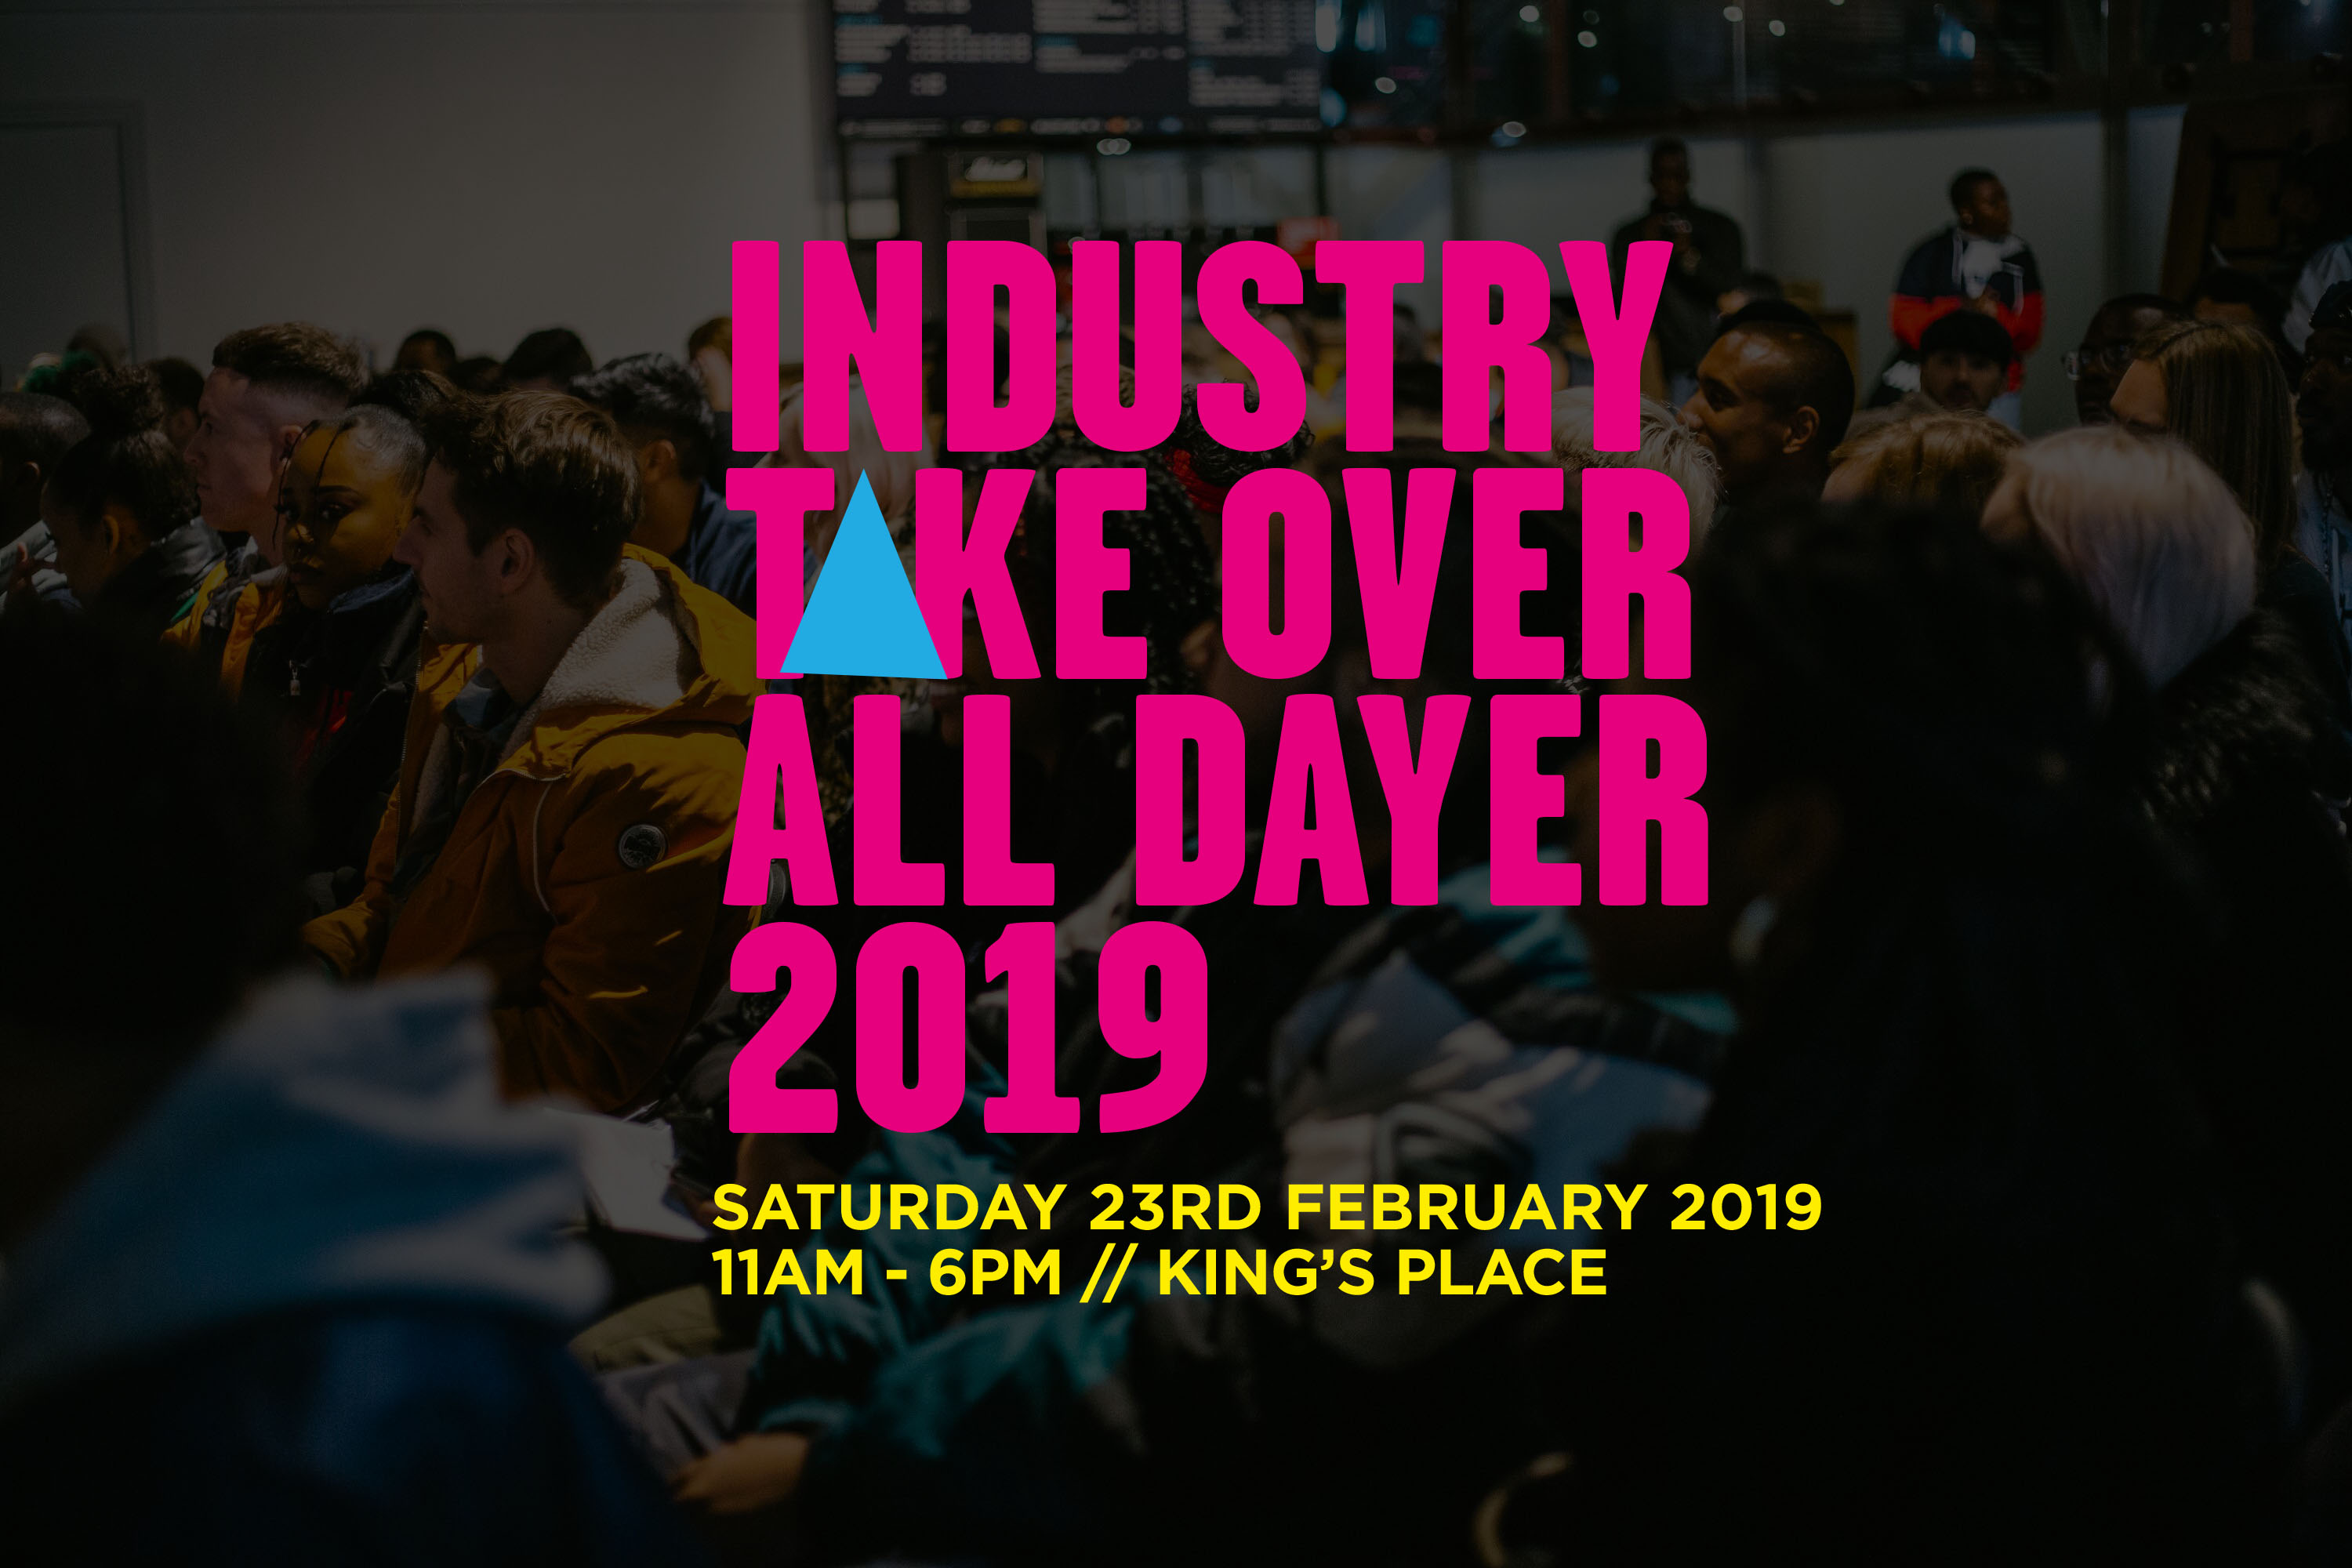 Industry take over all dayer 2019